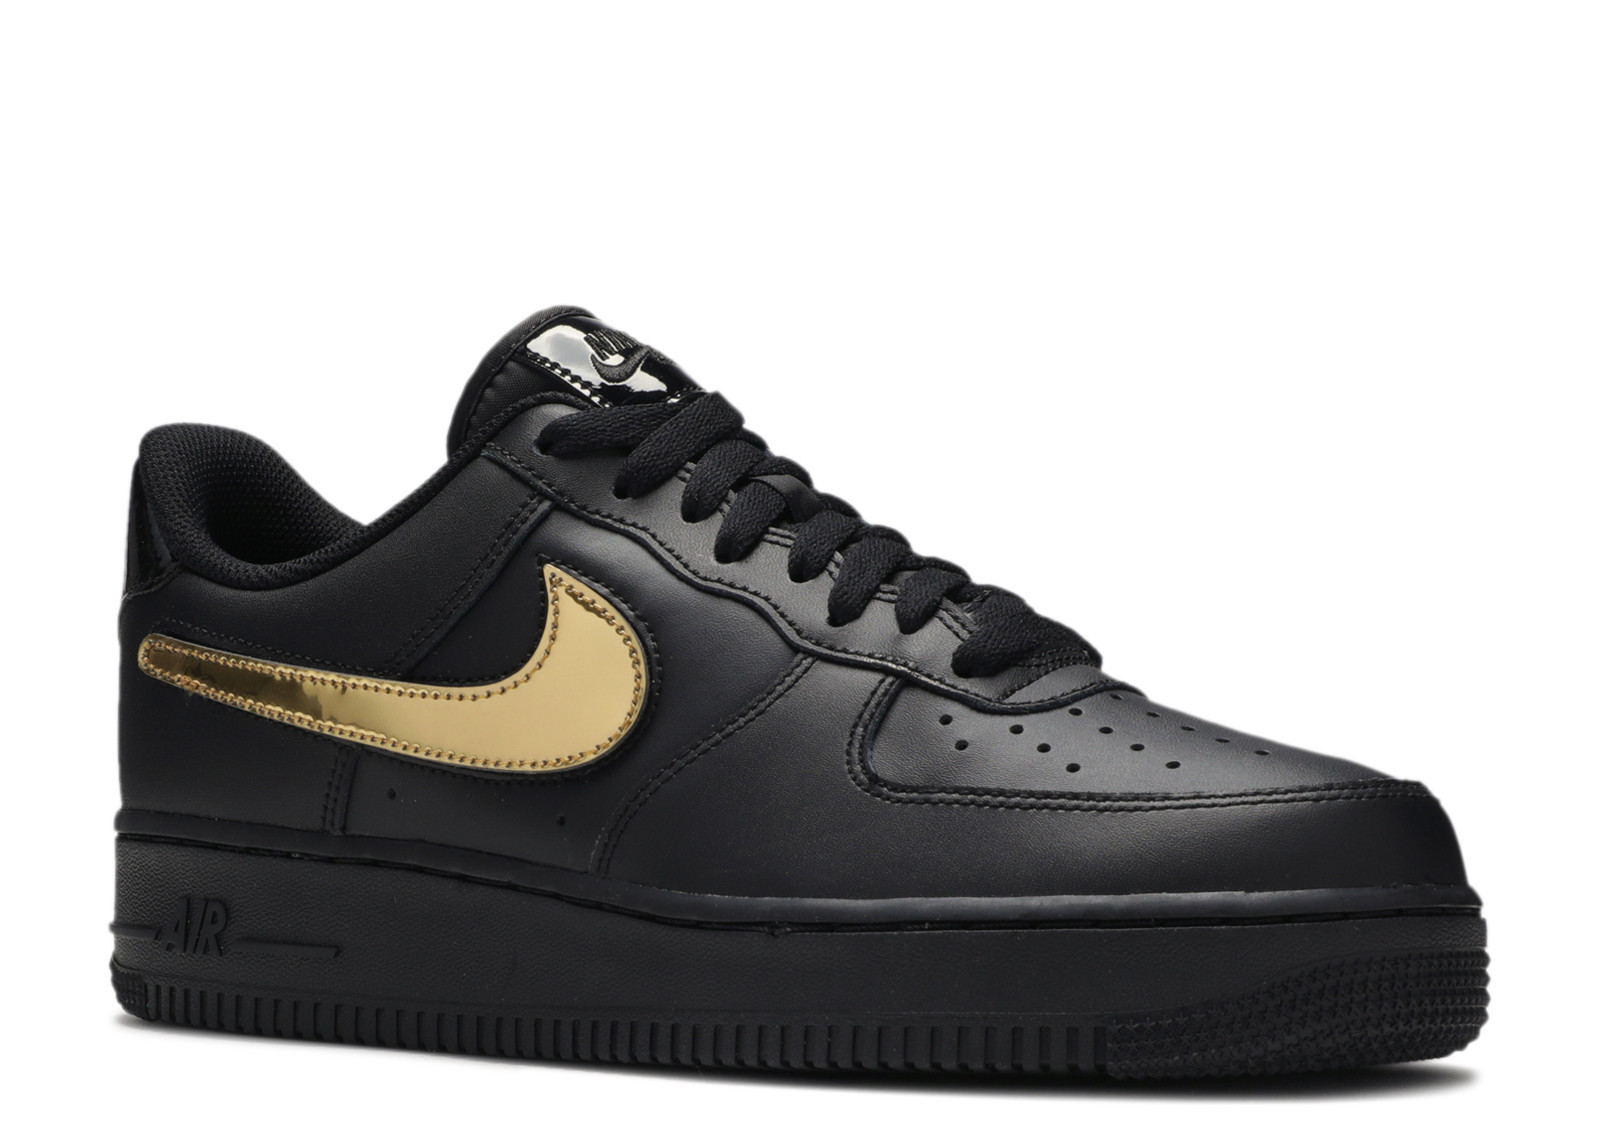 AIR FORCE 1 LOW "BLACK REMOVABLE SWOOSH" image 2